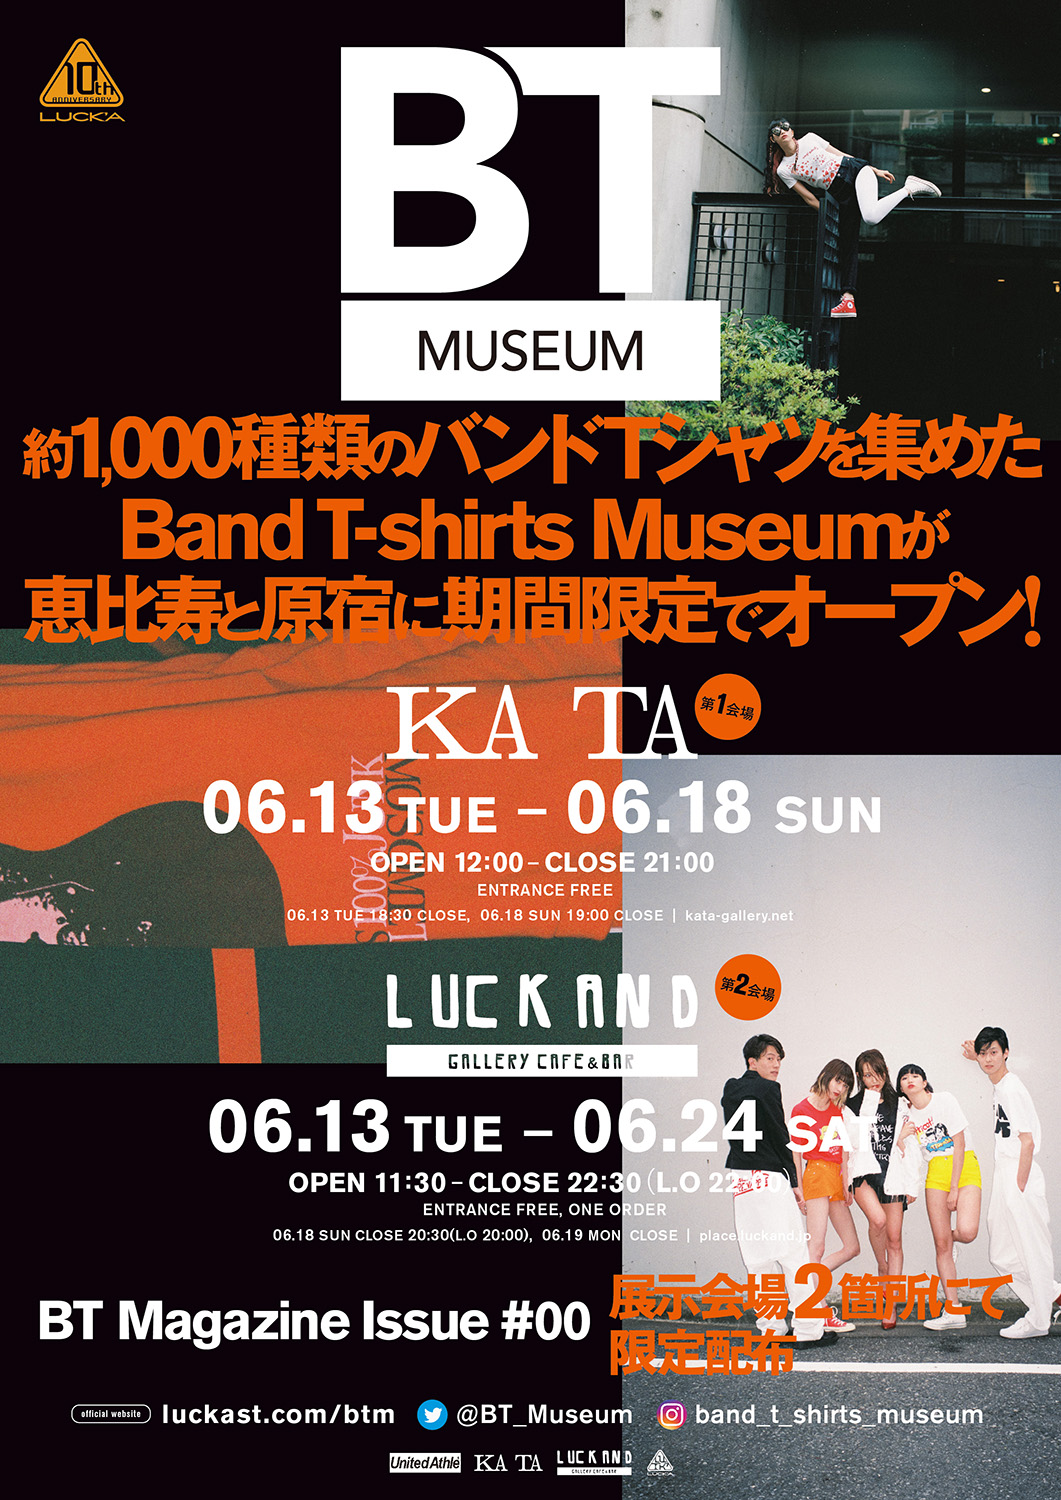 Band T-shirts Museum